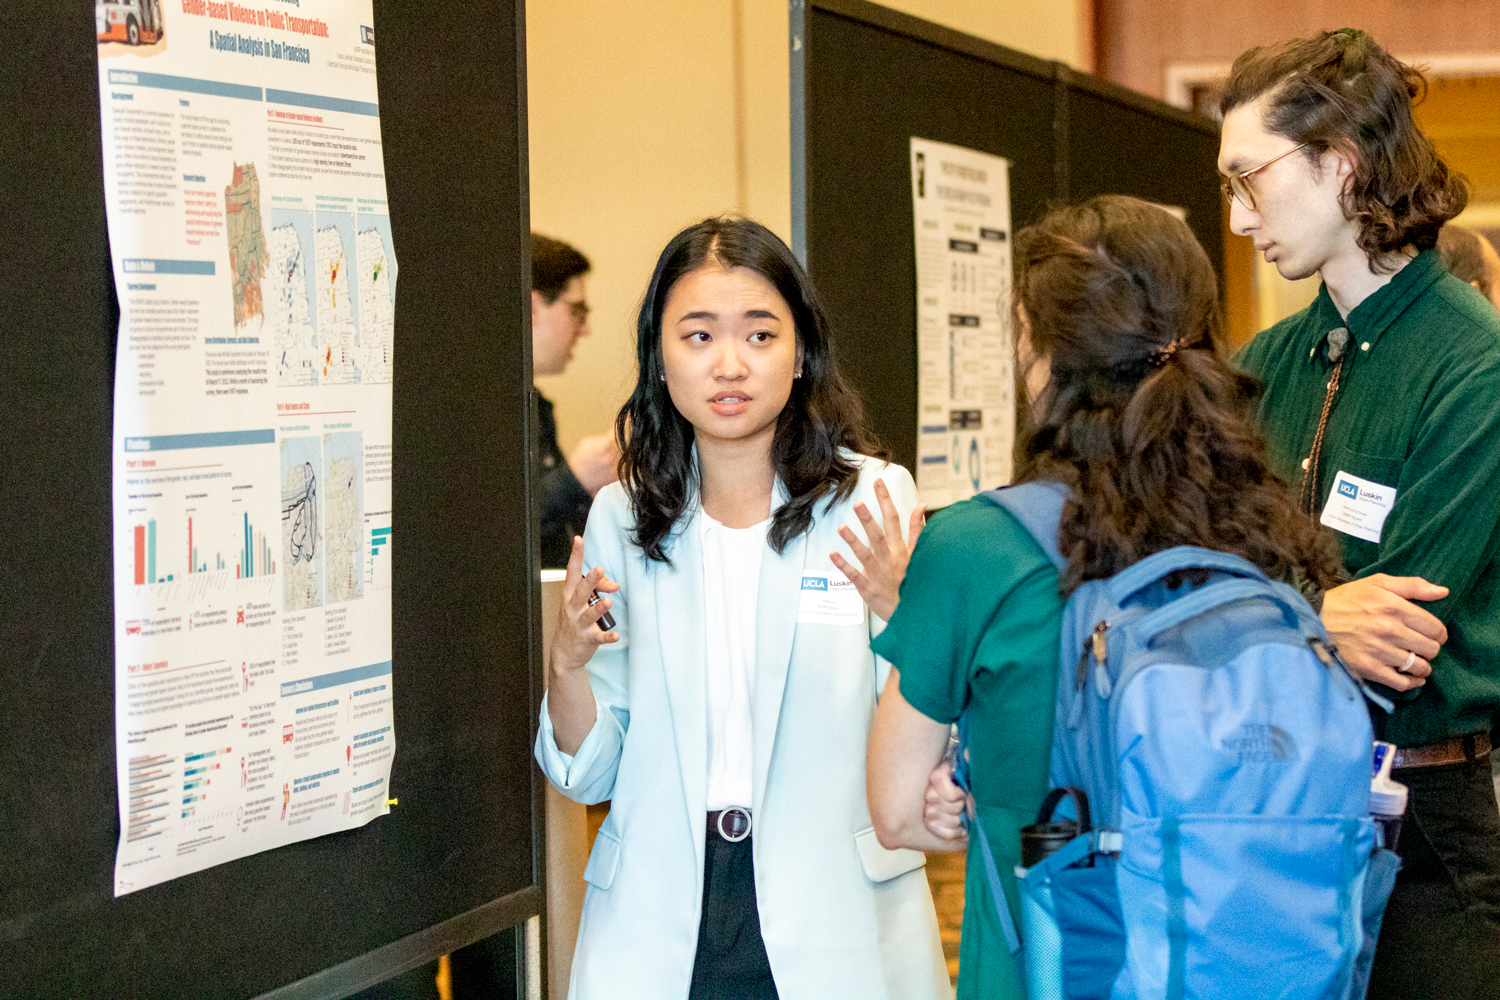 young woman in blue jacket gestures while talking about research shown on poster to her right